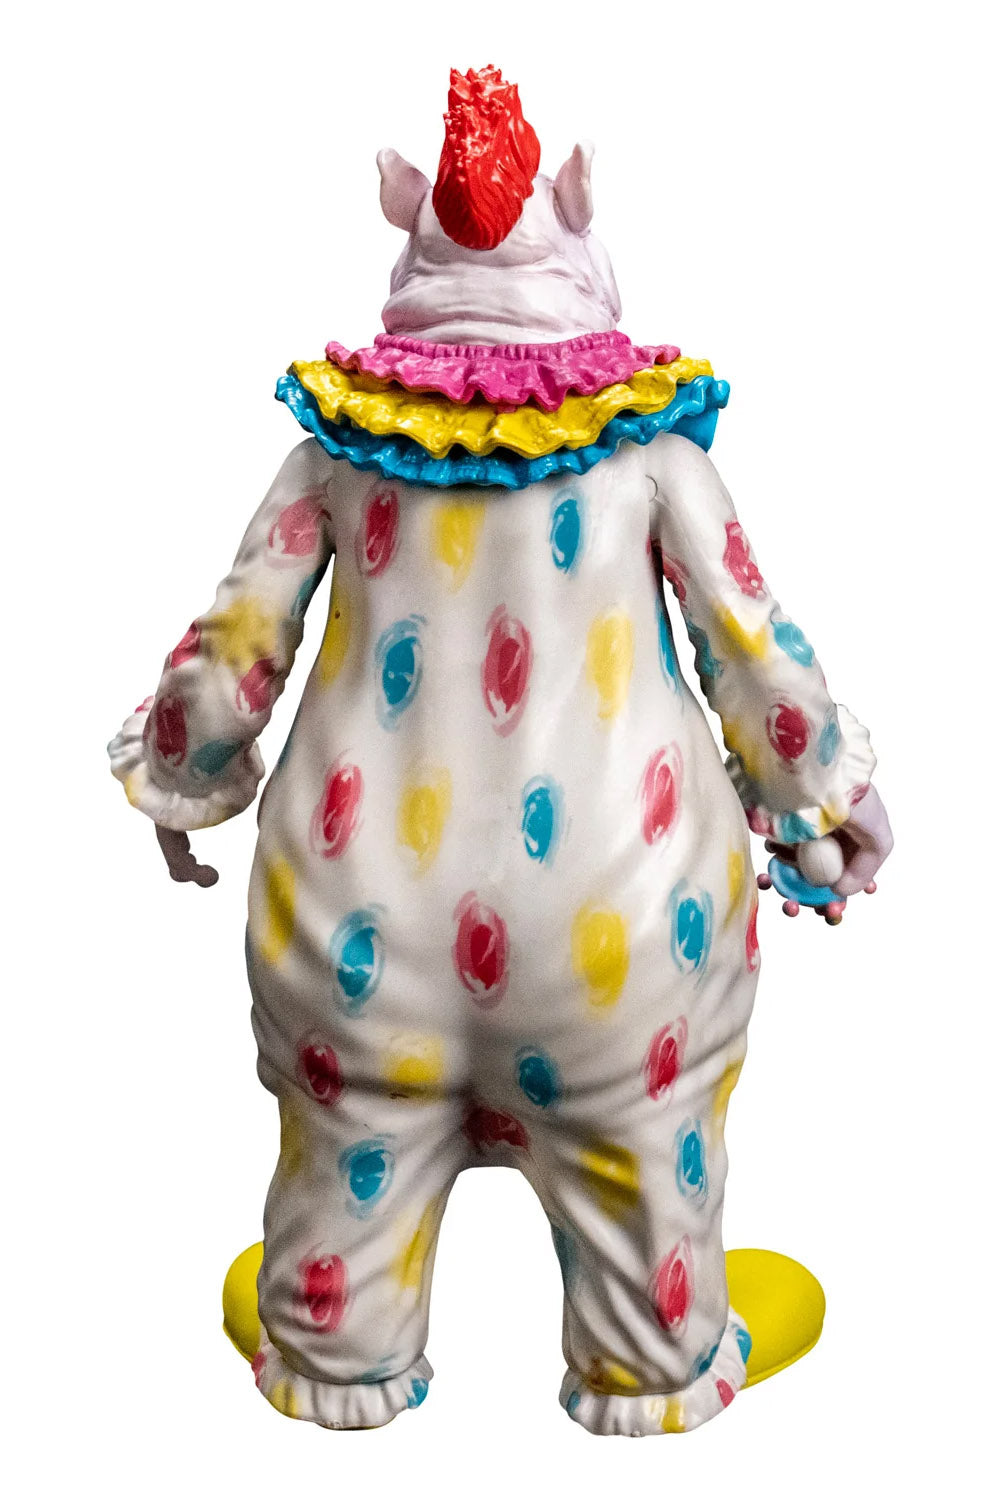 killer clowns from outer space figurine